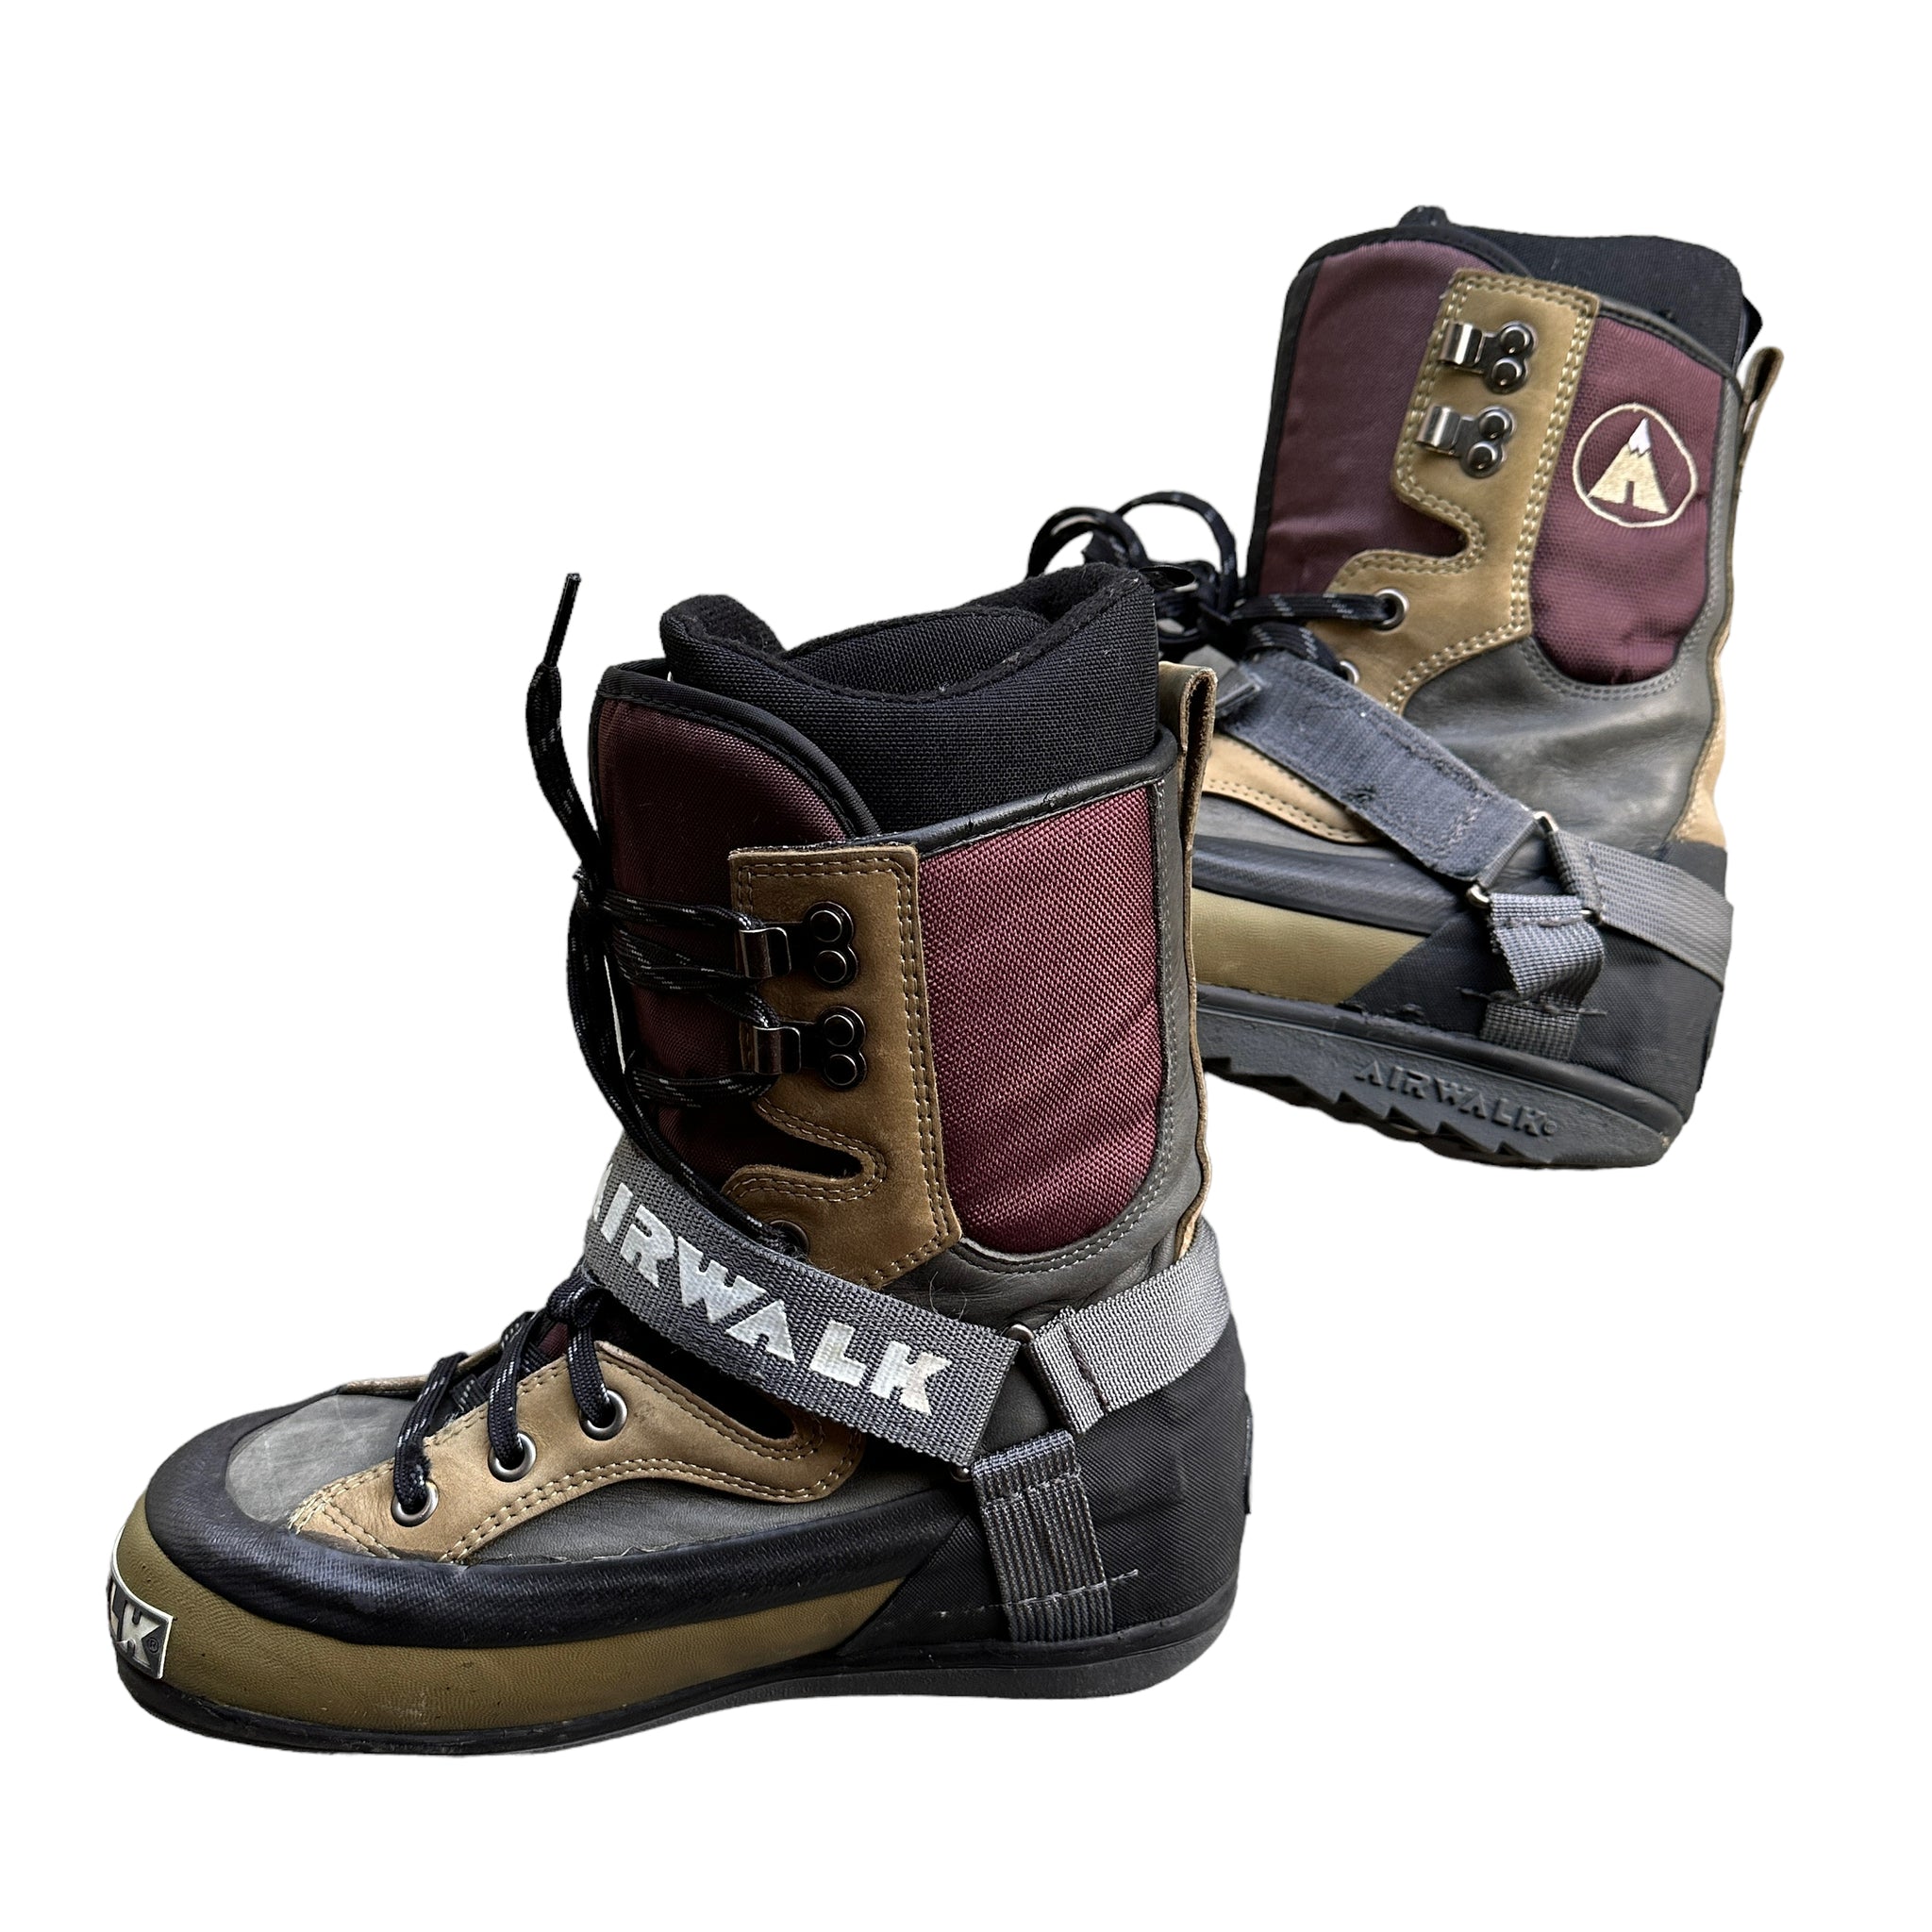 Deadstock 90s Airwalk “freeeide” snowboard boot.   -leather and rubber built to last   Sz8